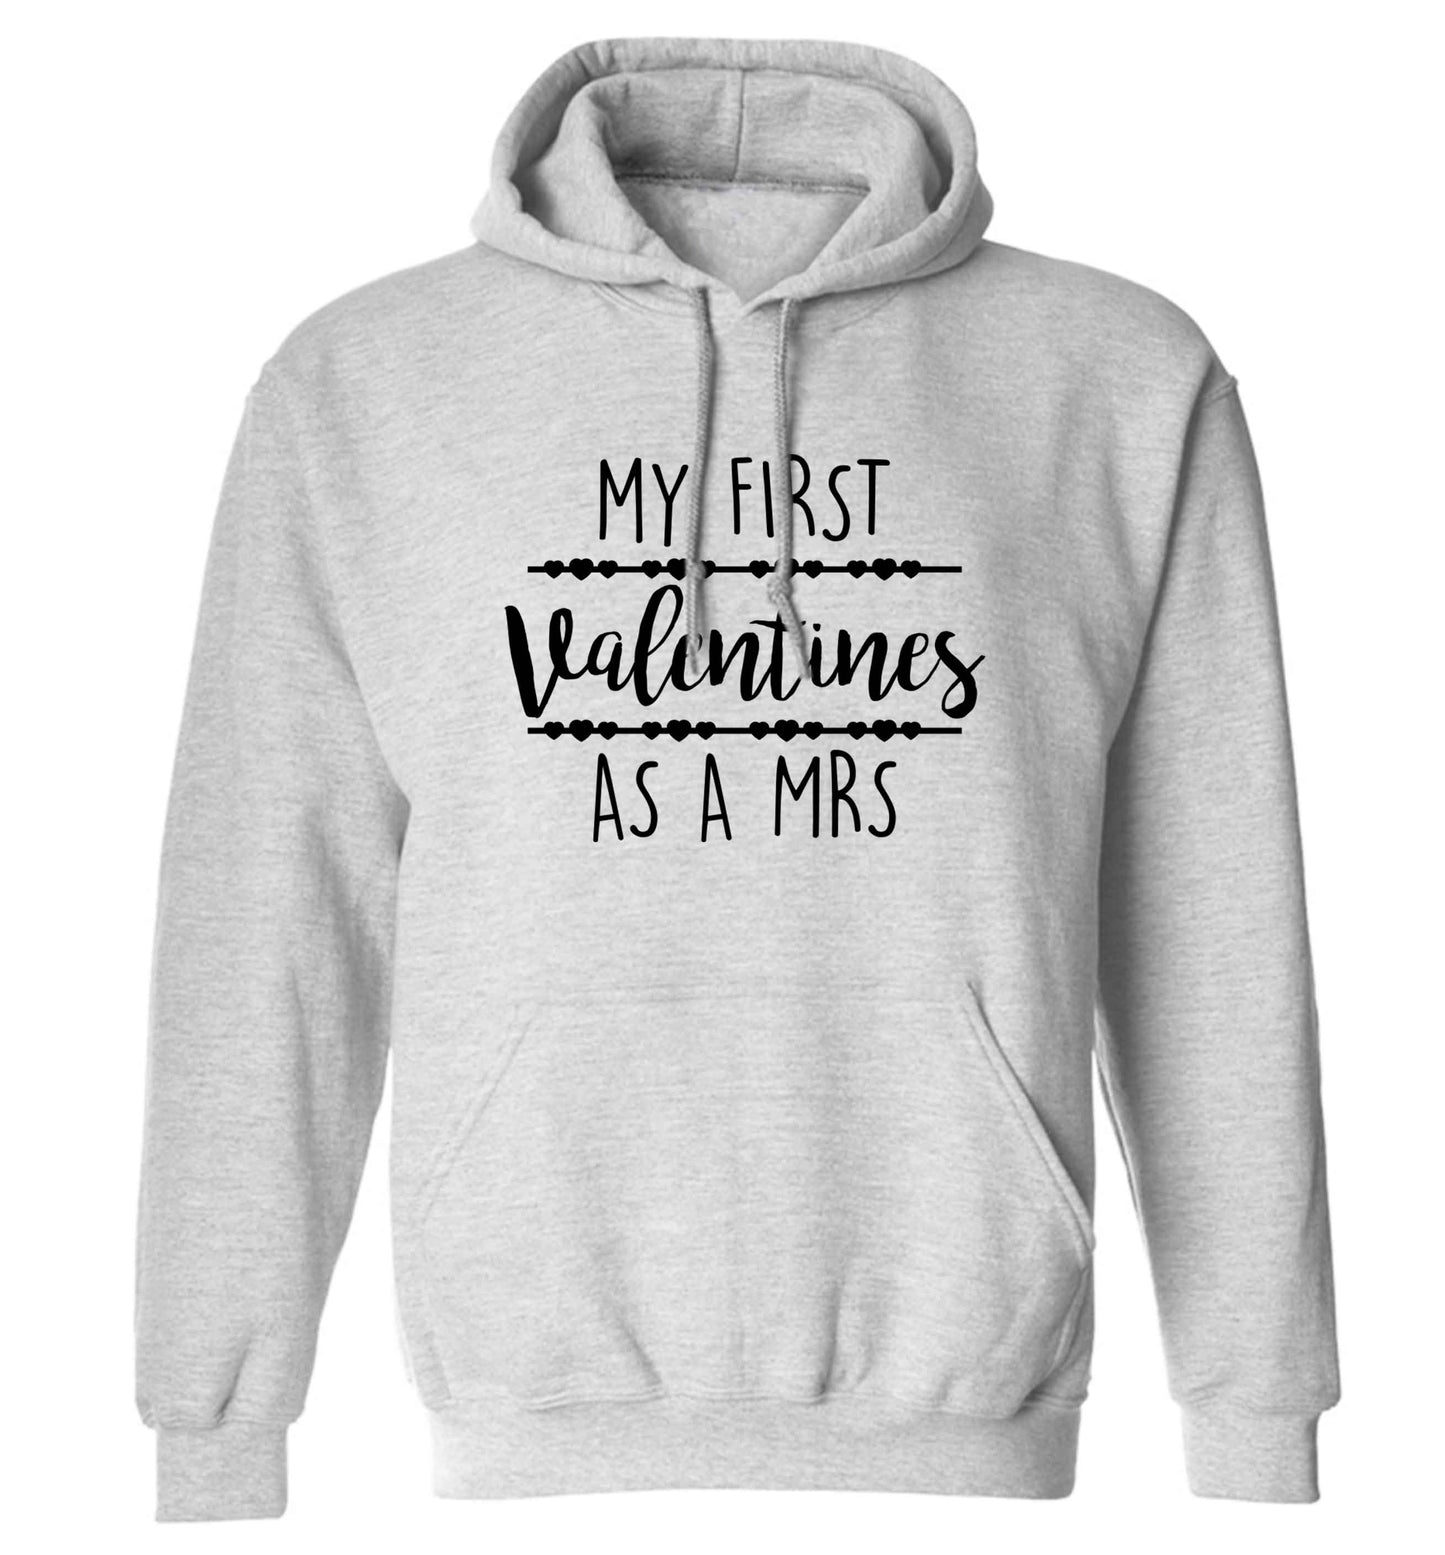 My first valentines as a Mrs adults unisex grey hoodie 2XL